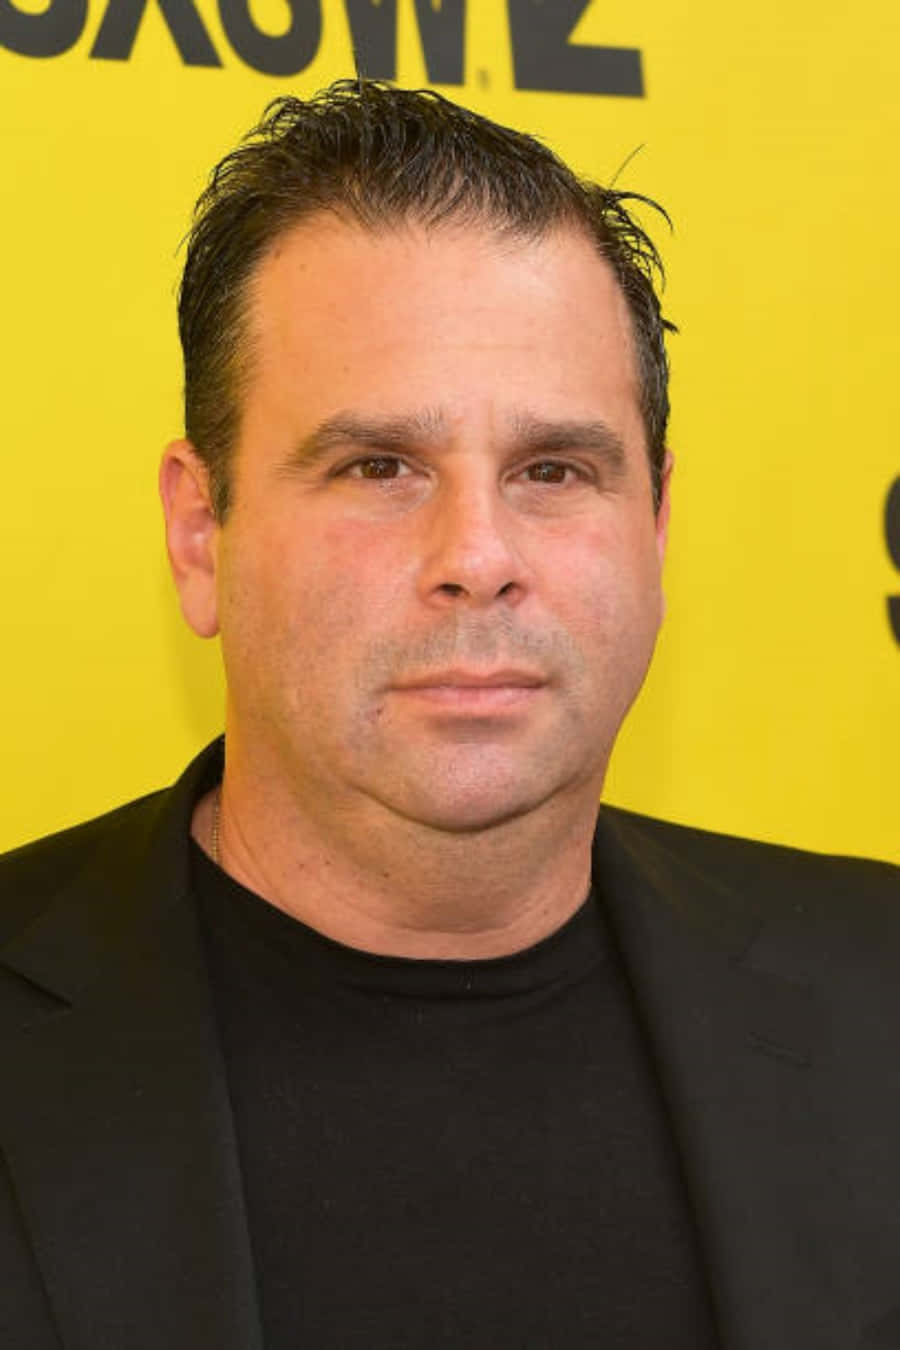 A Man In A Black Shirt Standing In Front Of A Yellow Wall